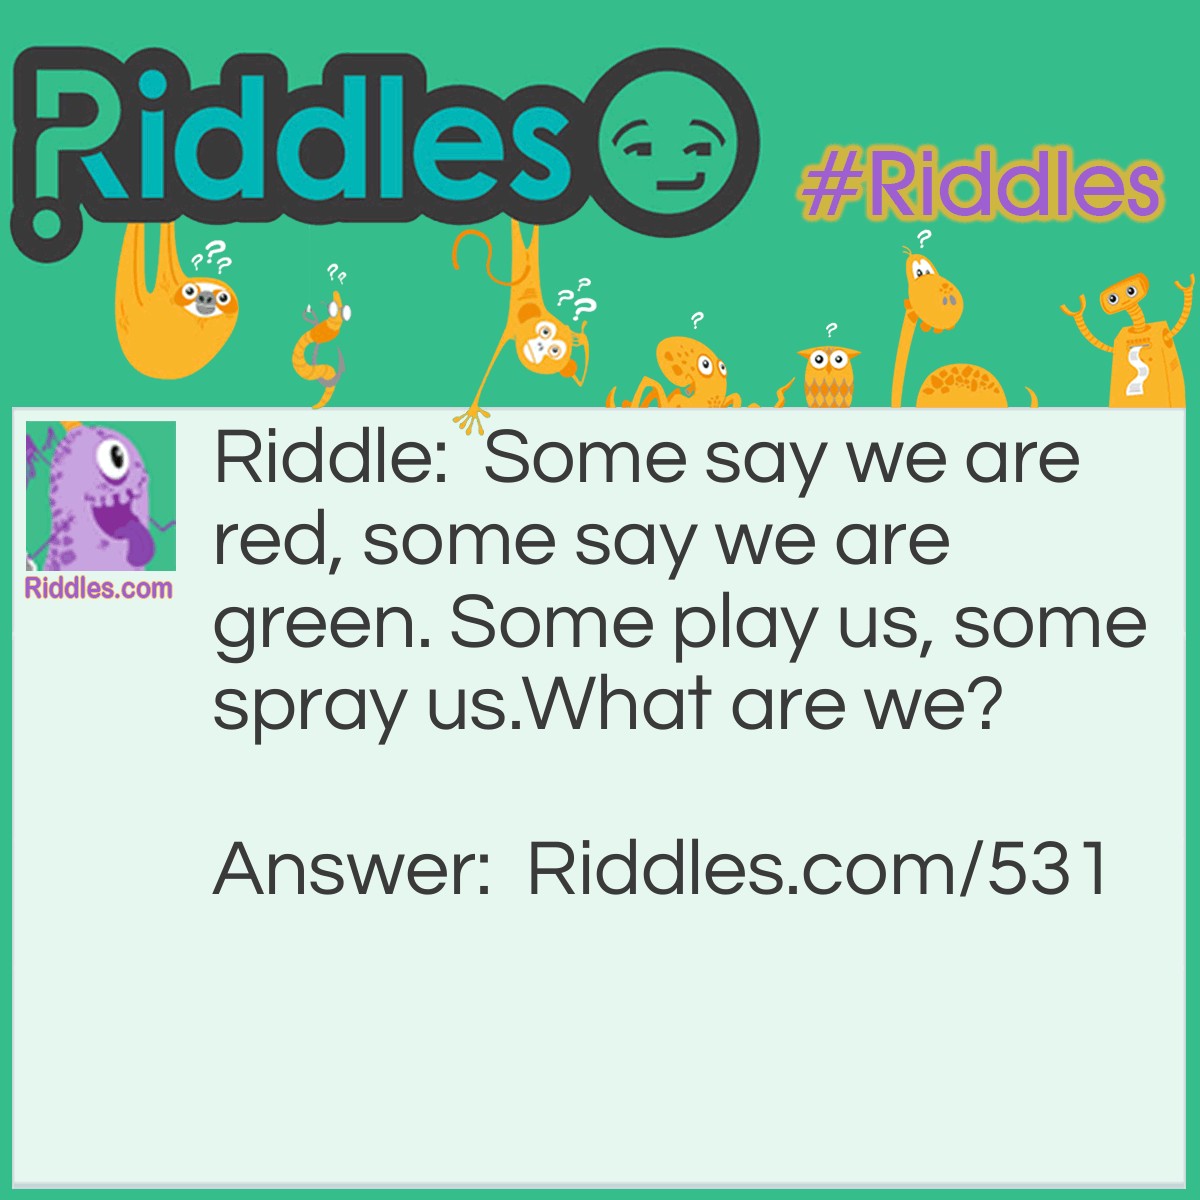 Riddle: Some say we are red, some say we are green. Some play us, some spray us.
What are we? Answer: Pepper.